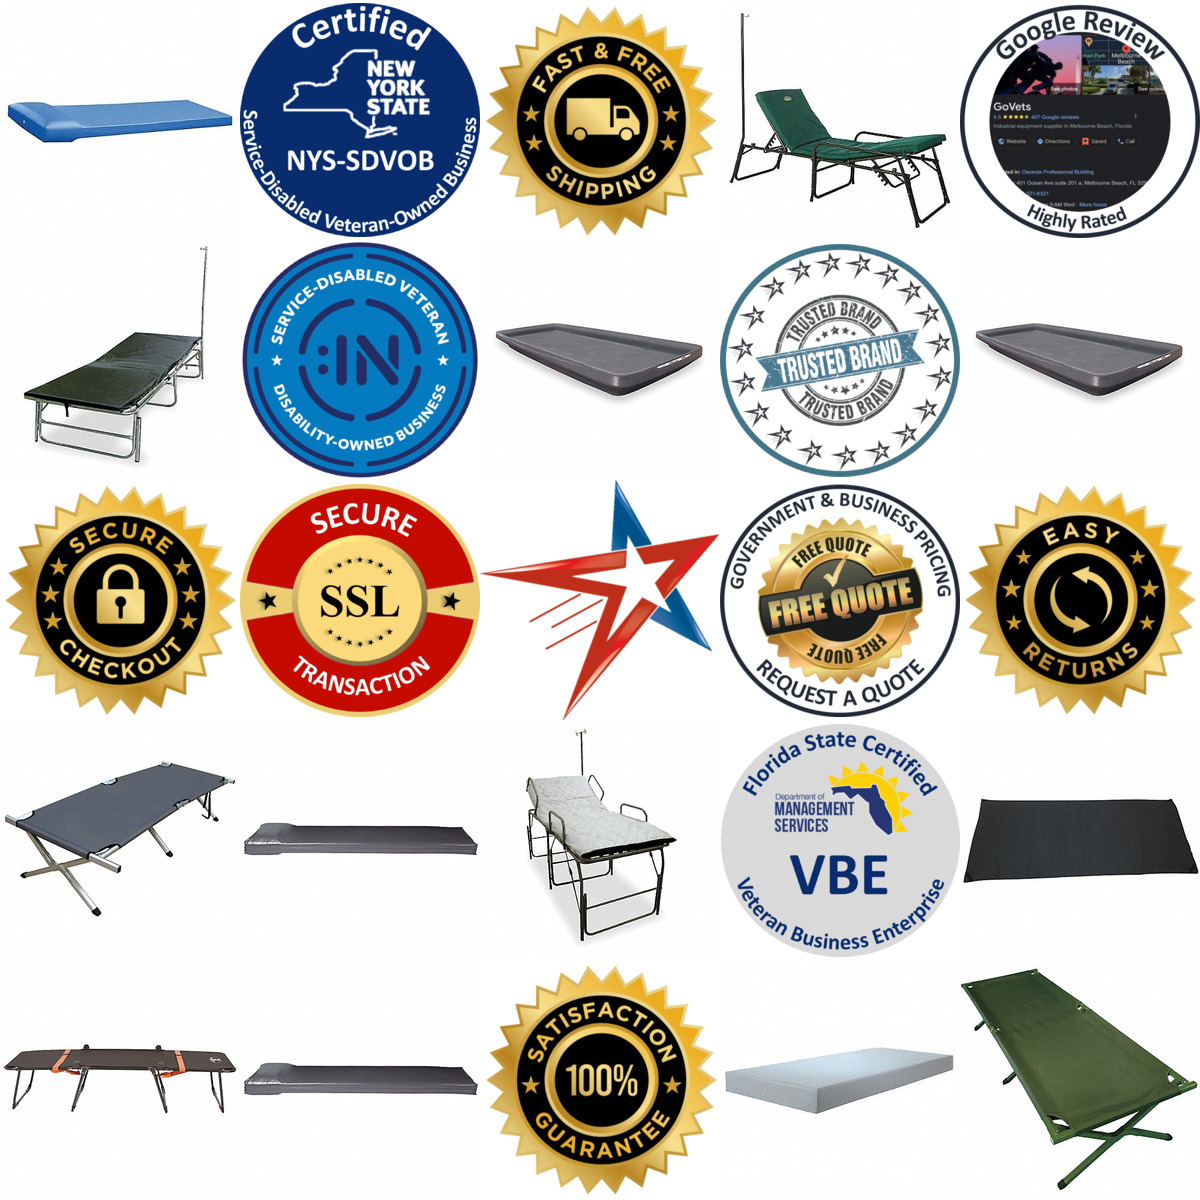 A selection of Emergency Response Cots and Beds products on GoVets